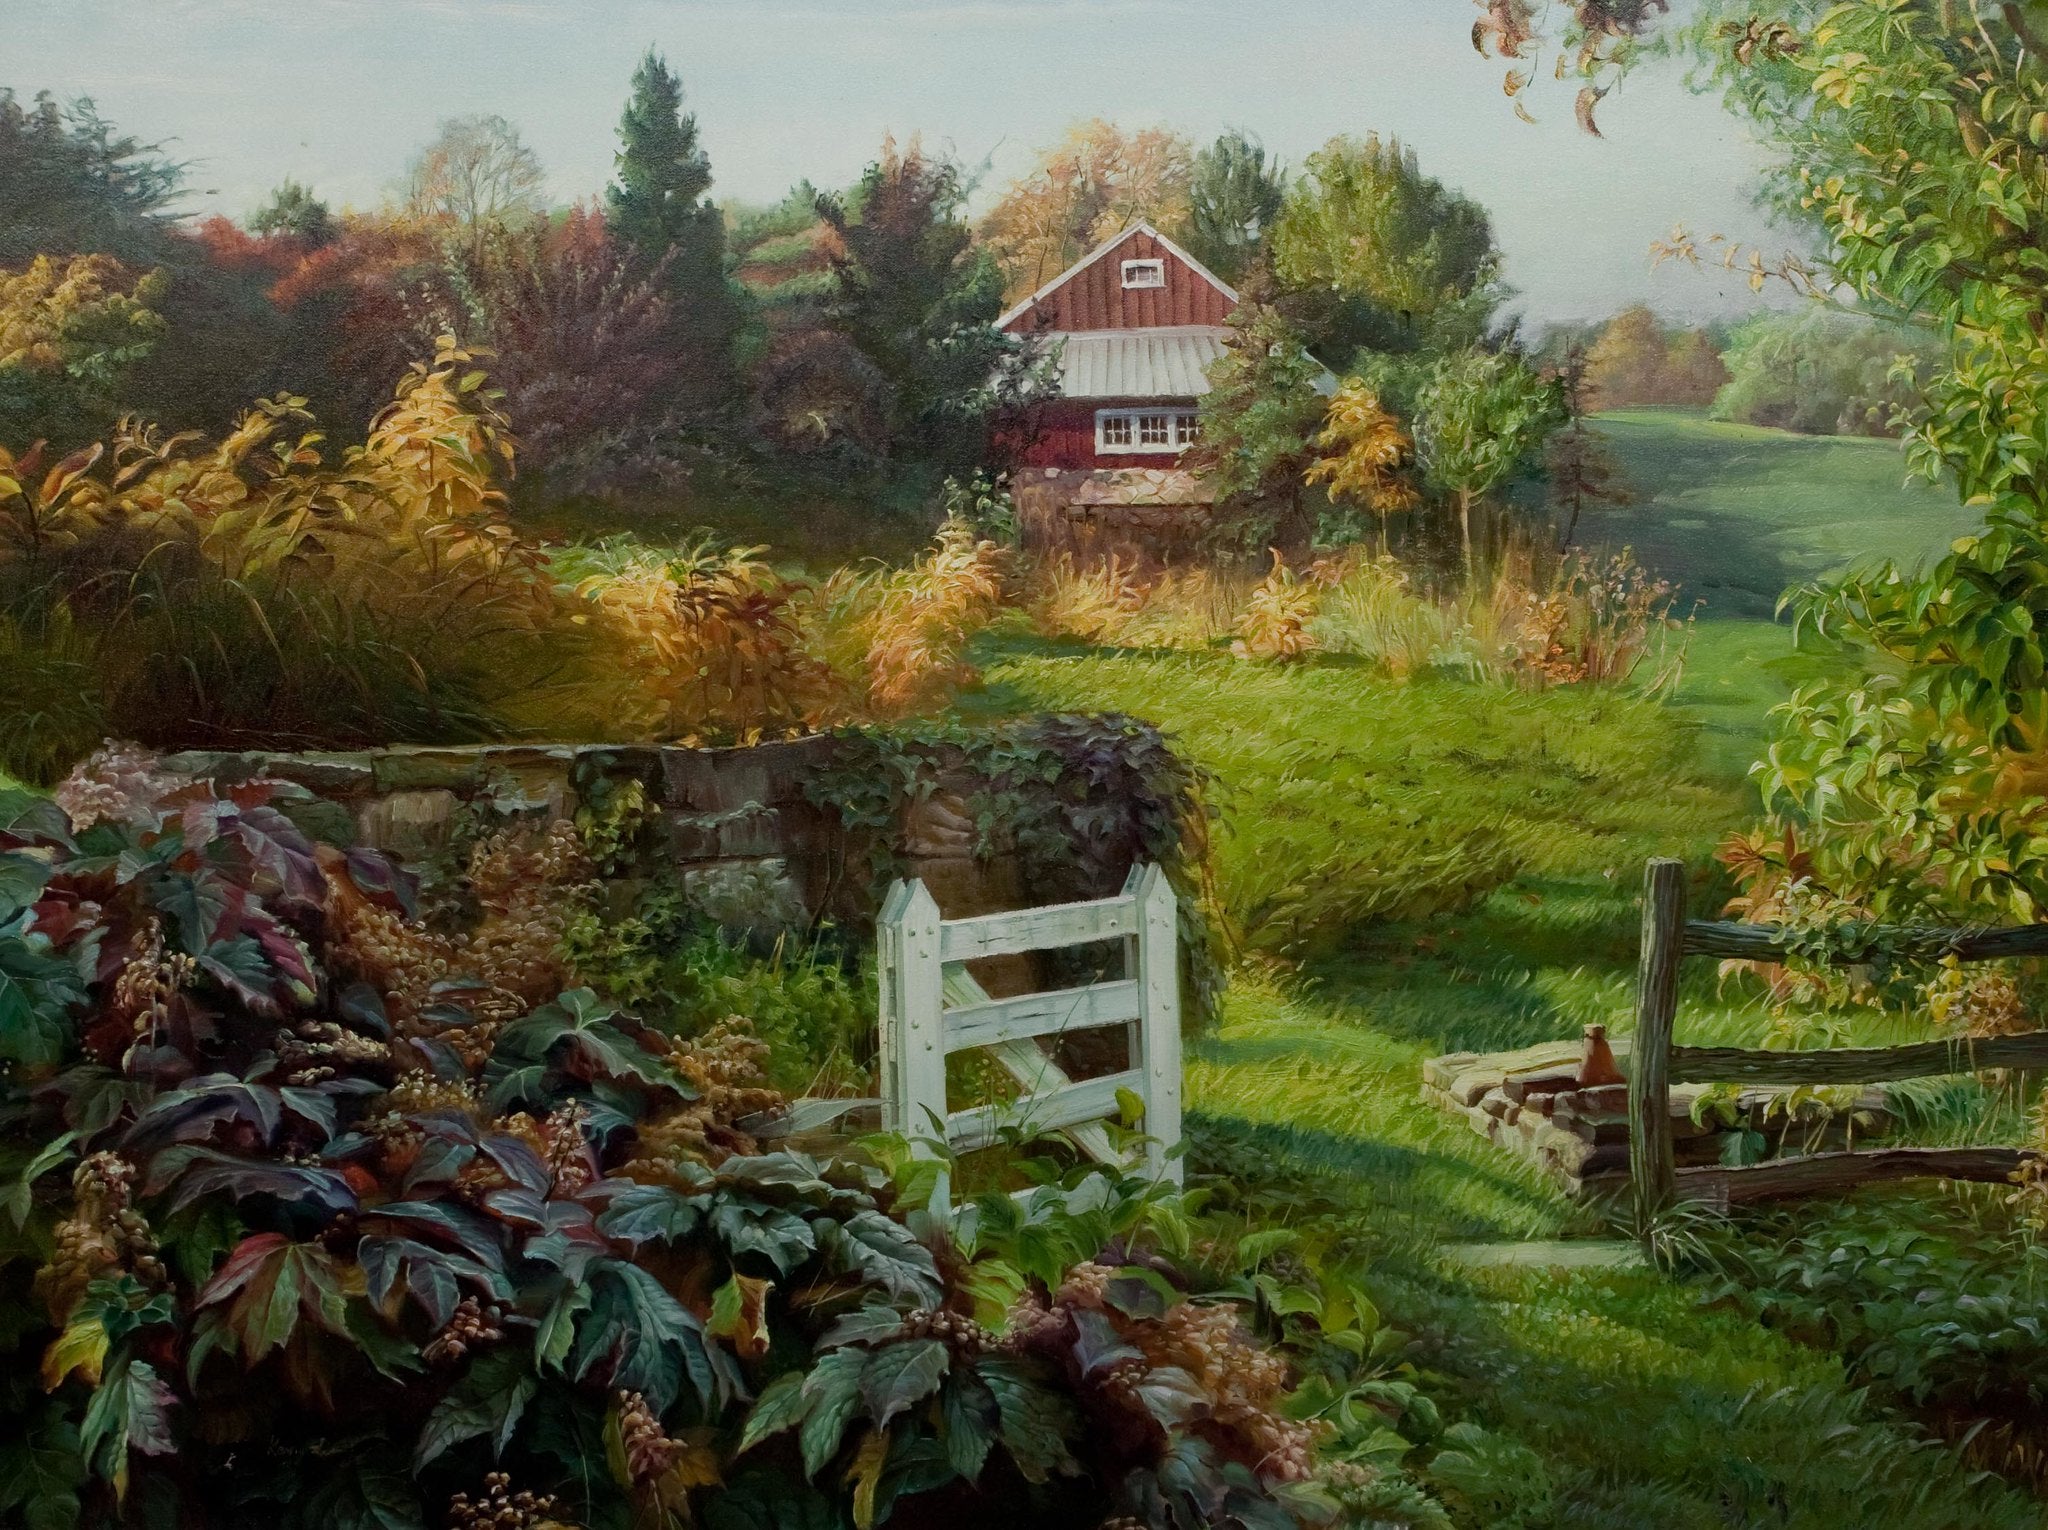 "Farm House in PA"  Kevin Liang  2003  Original oil on canvas with frame 36" x 46".